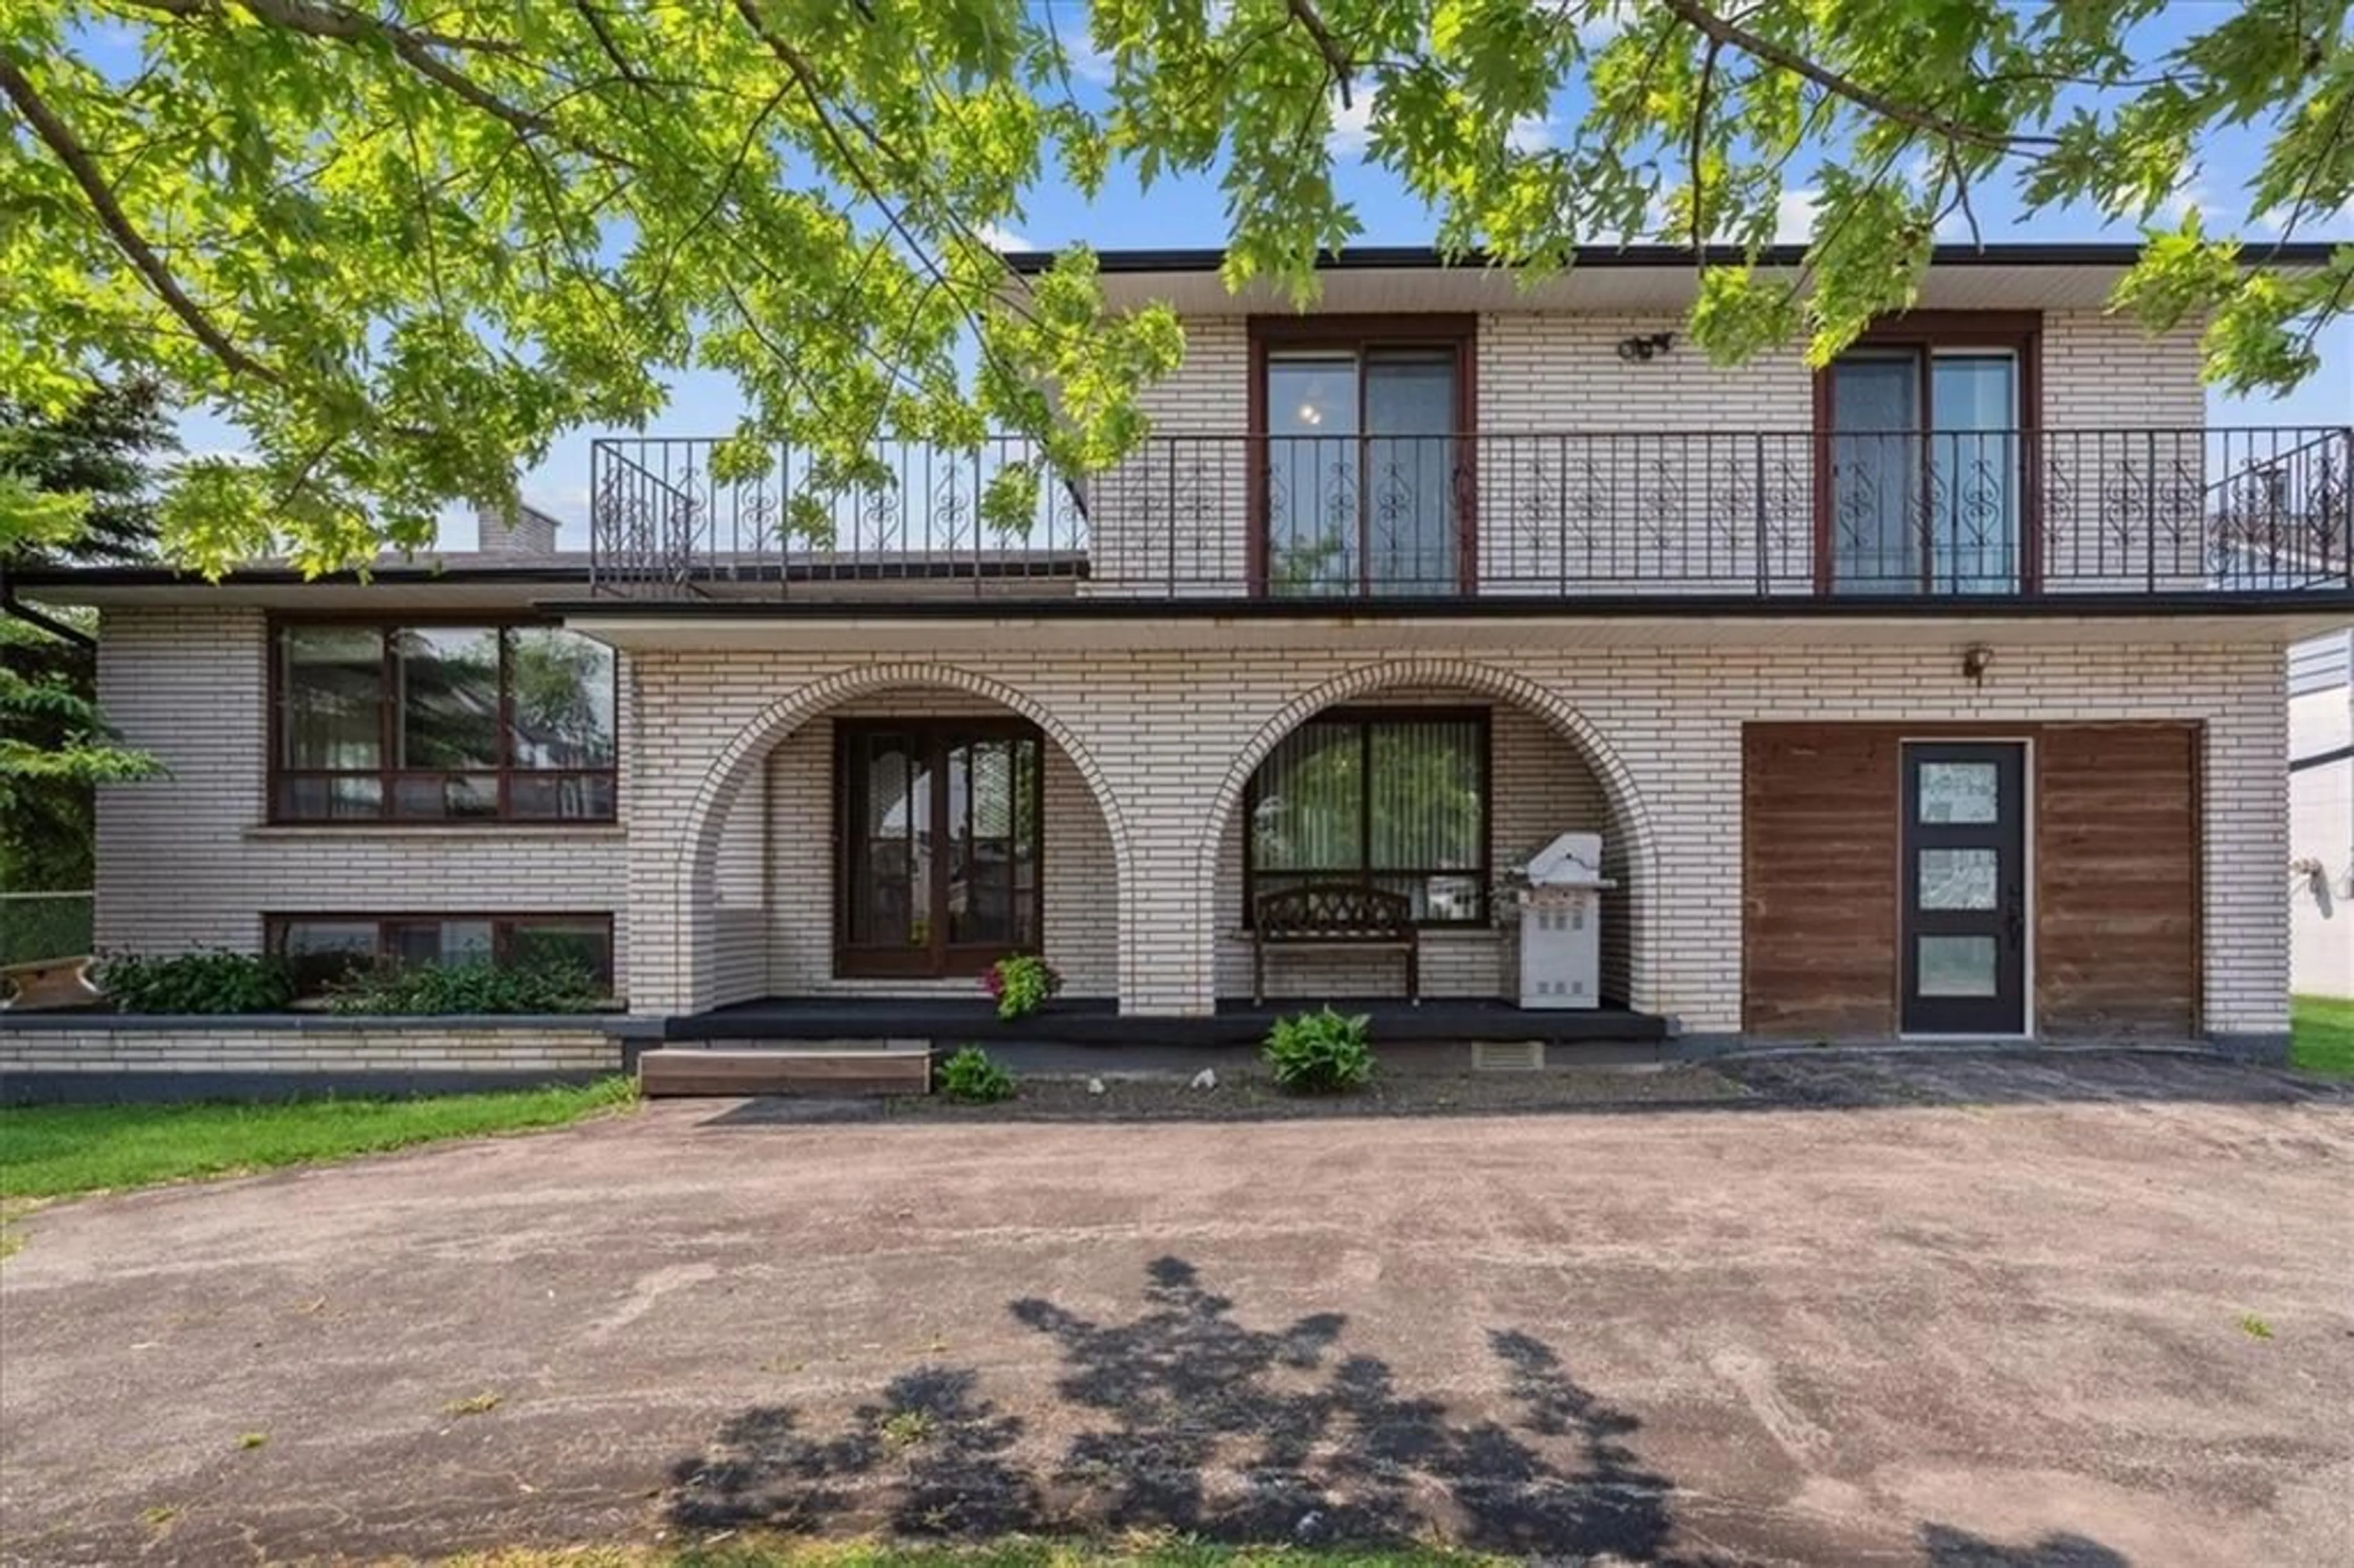 Home with brick exterior material for 251 GREEN MOUNTAIN Rd, Stoney Creek Ontario L8J 2Z5